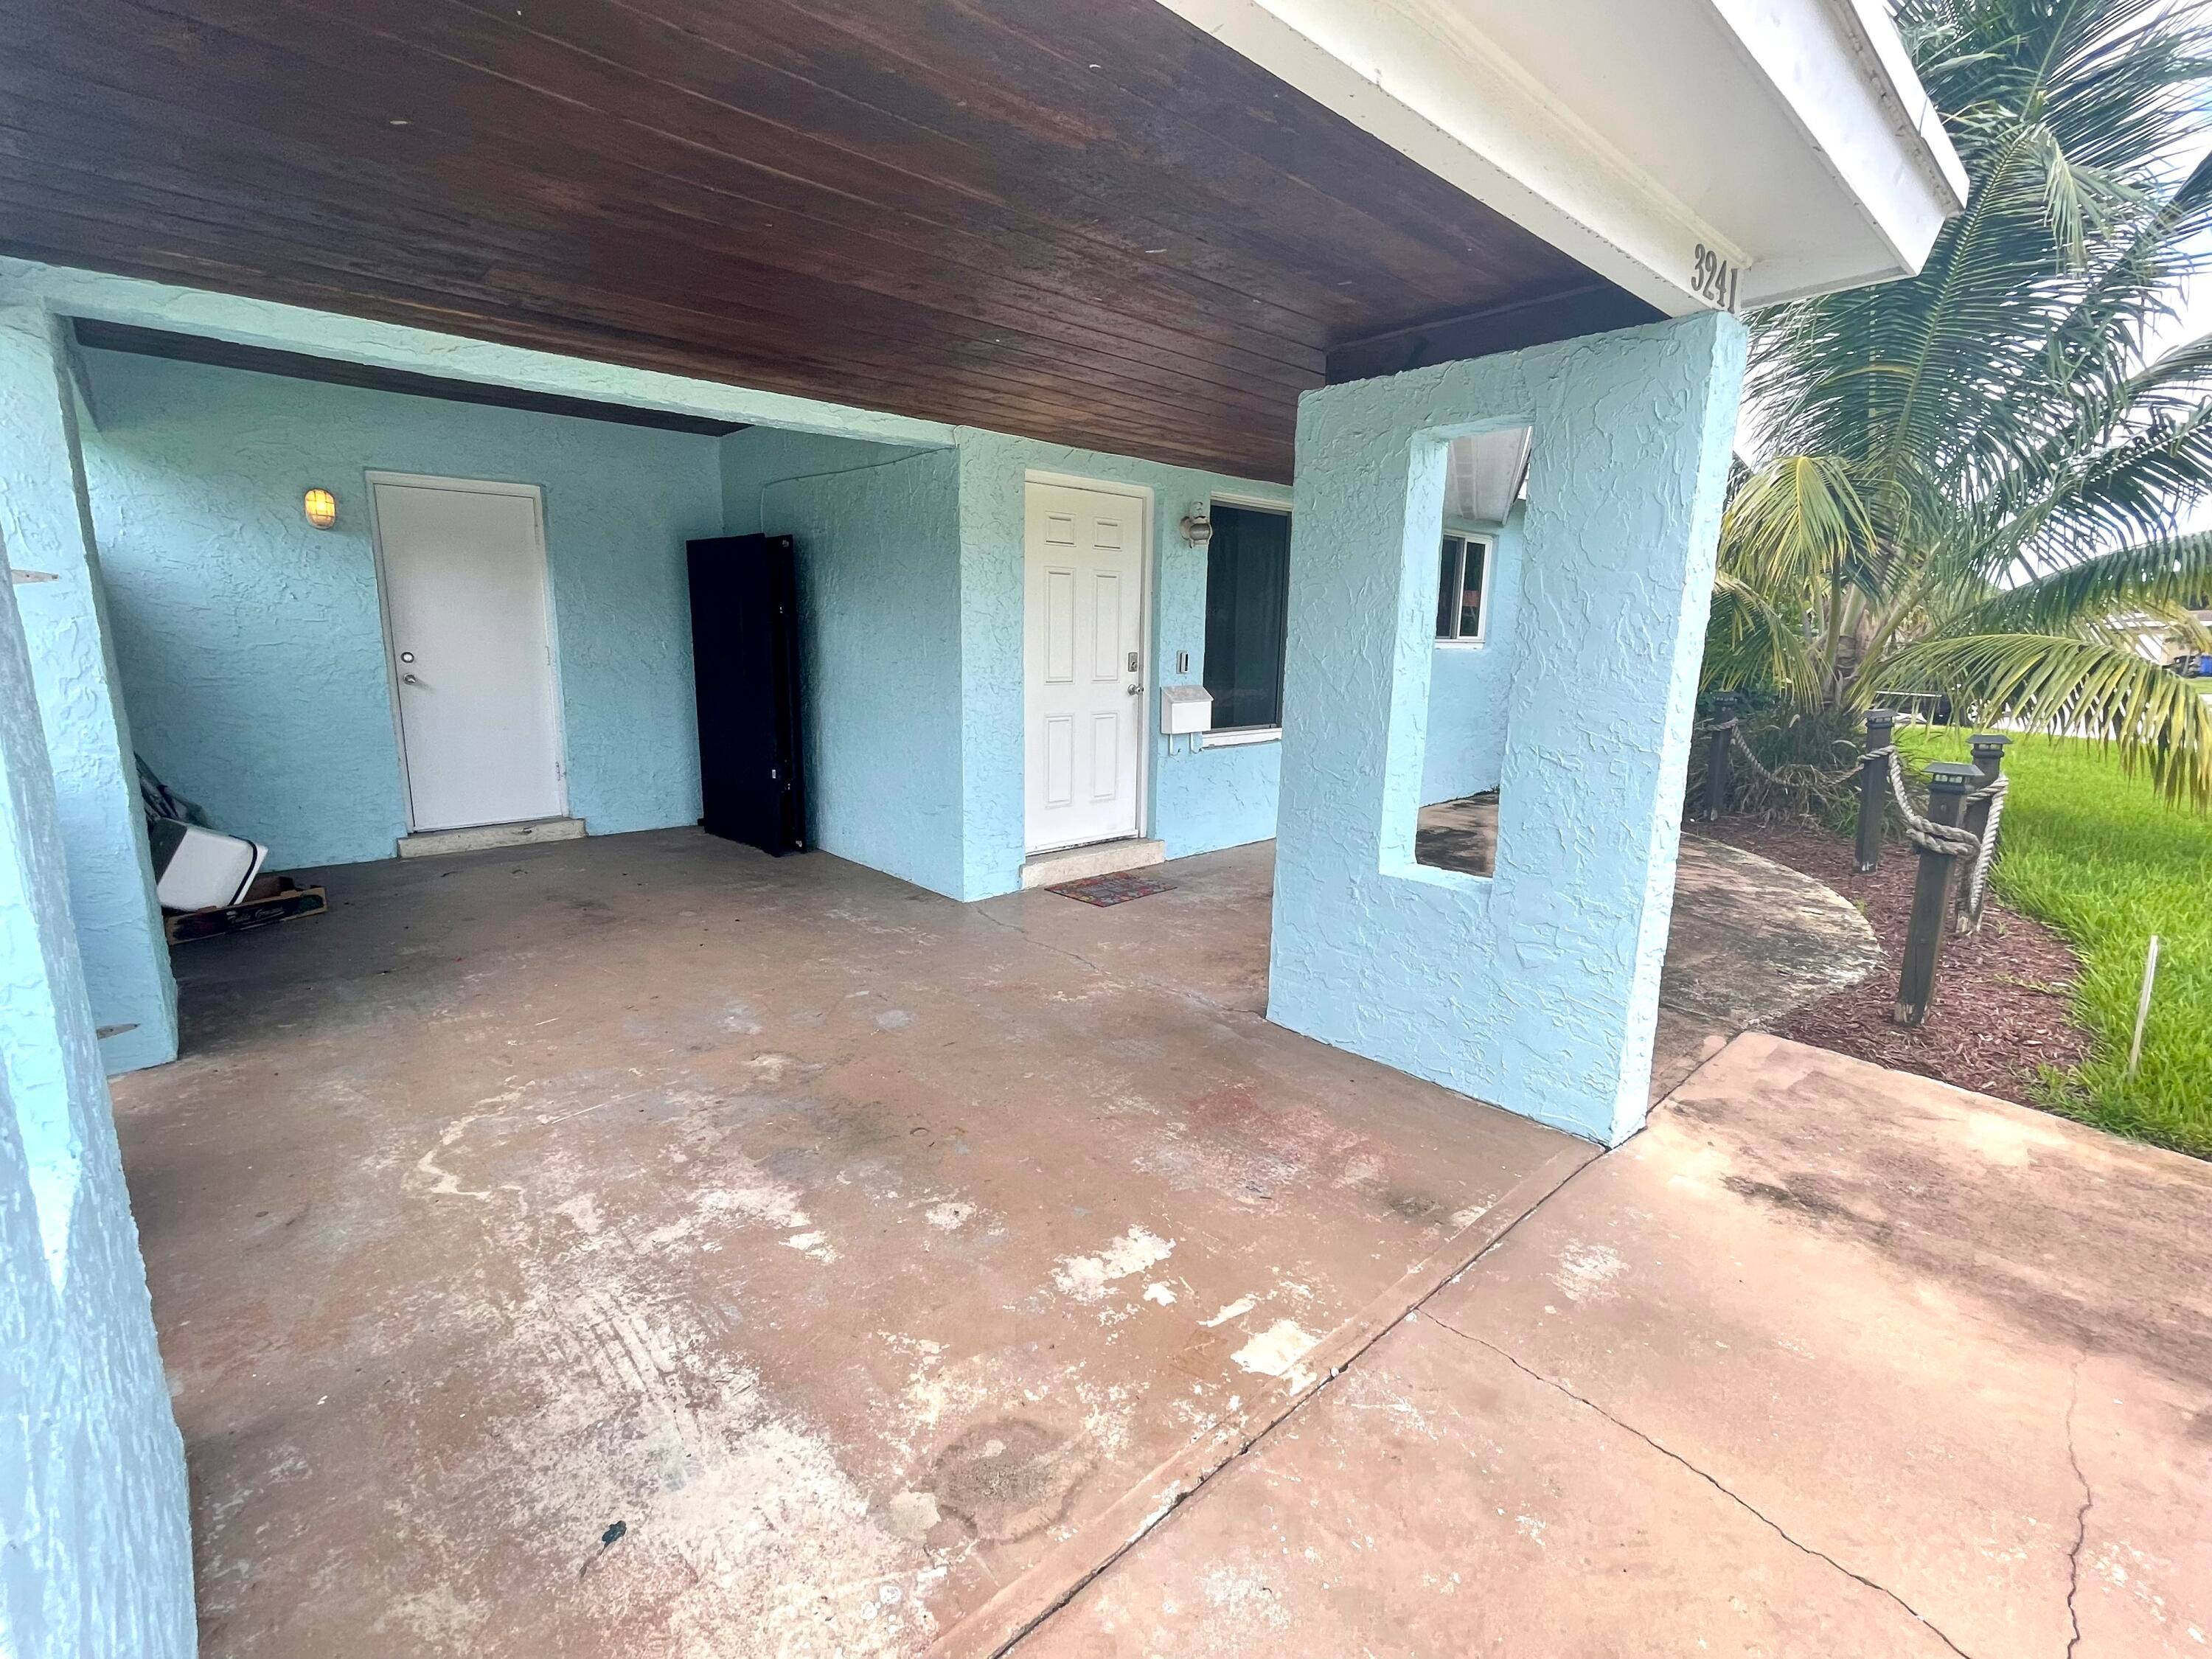 Walk in to this updated and spacious HOUSE in Fort Lauderdale, on a quiet street, with stainless steel appliances in the open kitchen, and a bar !